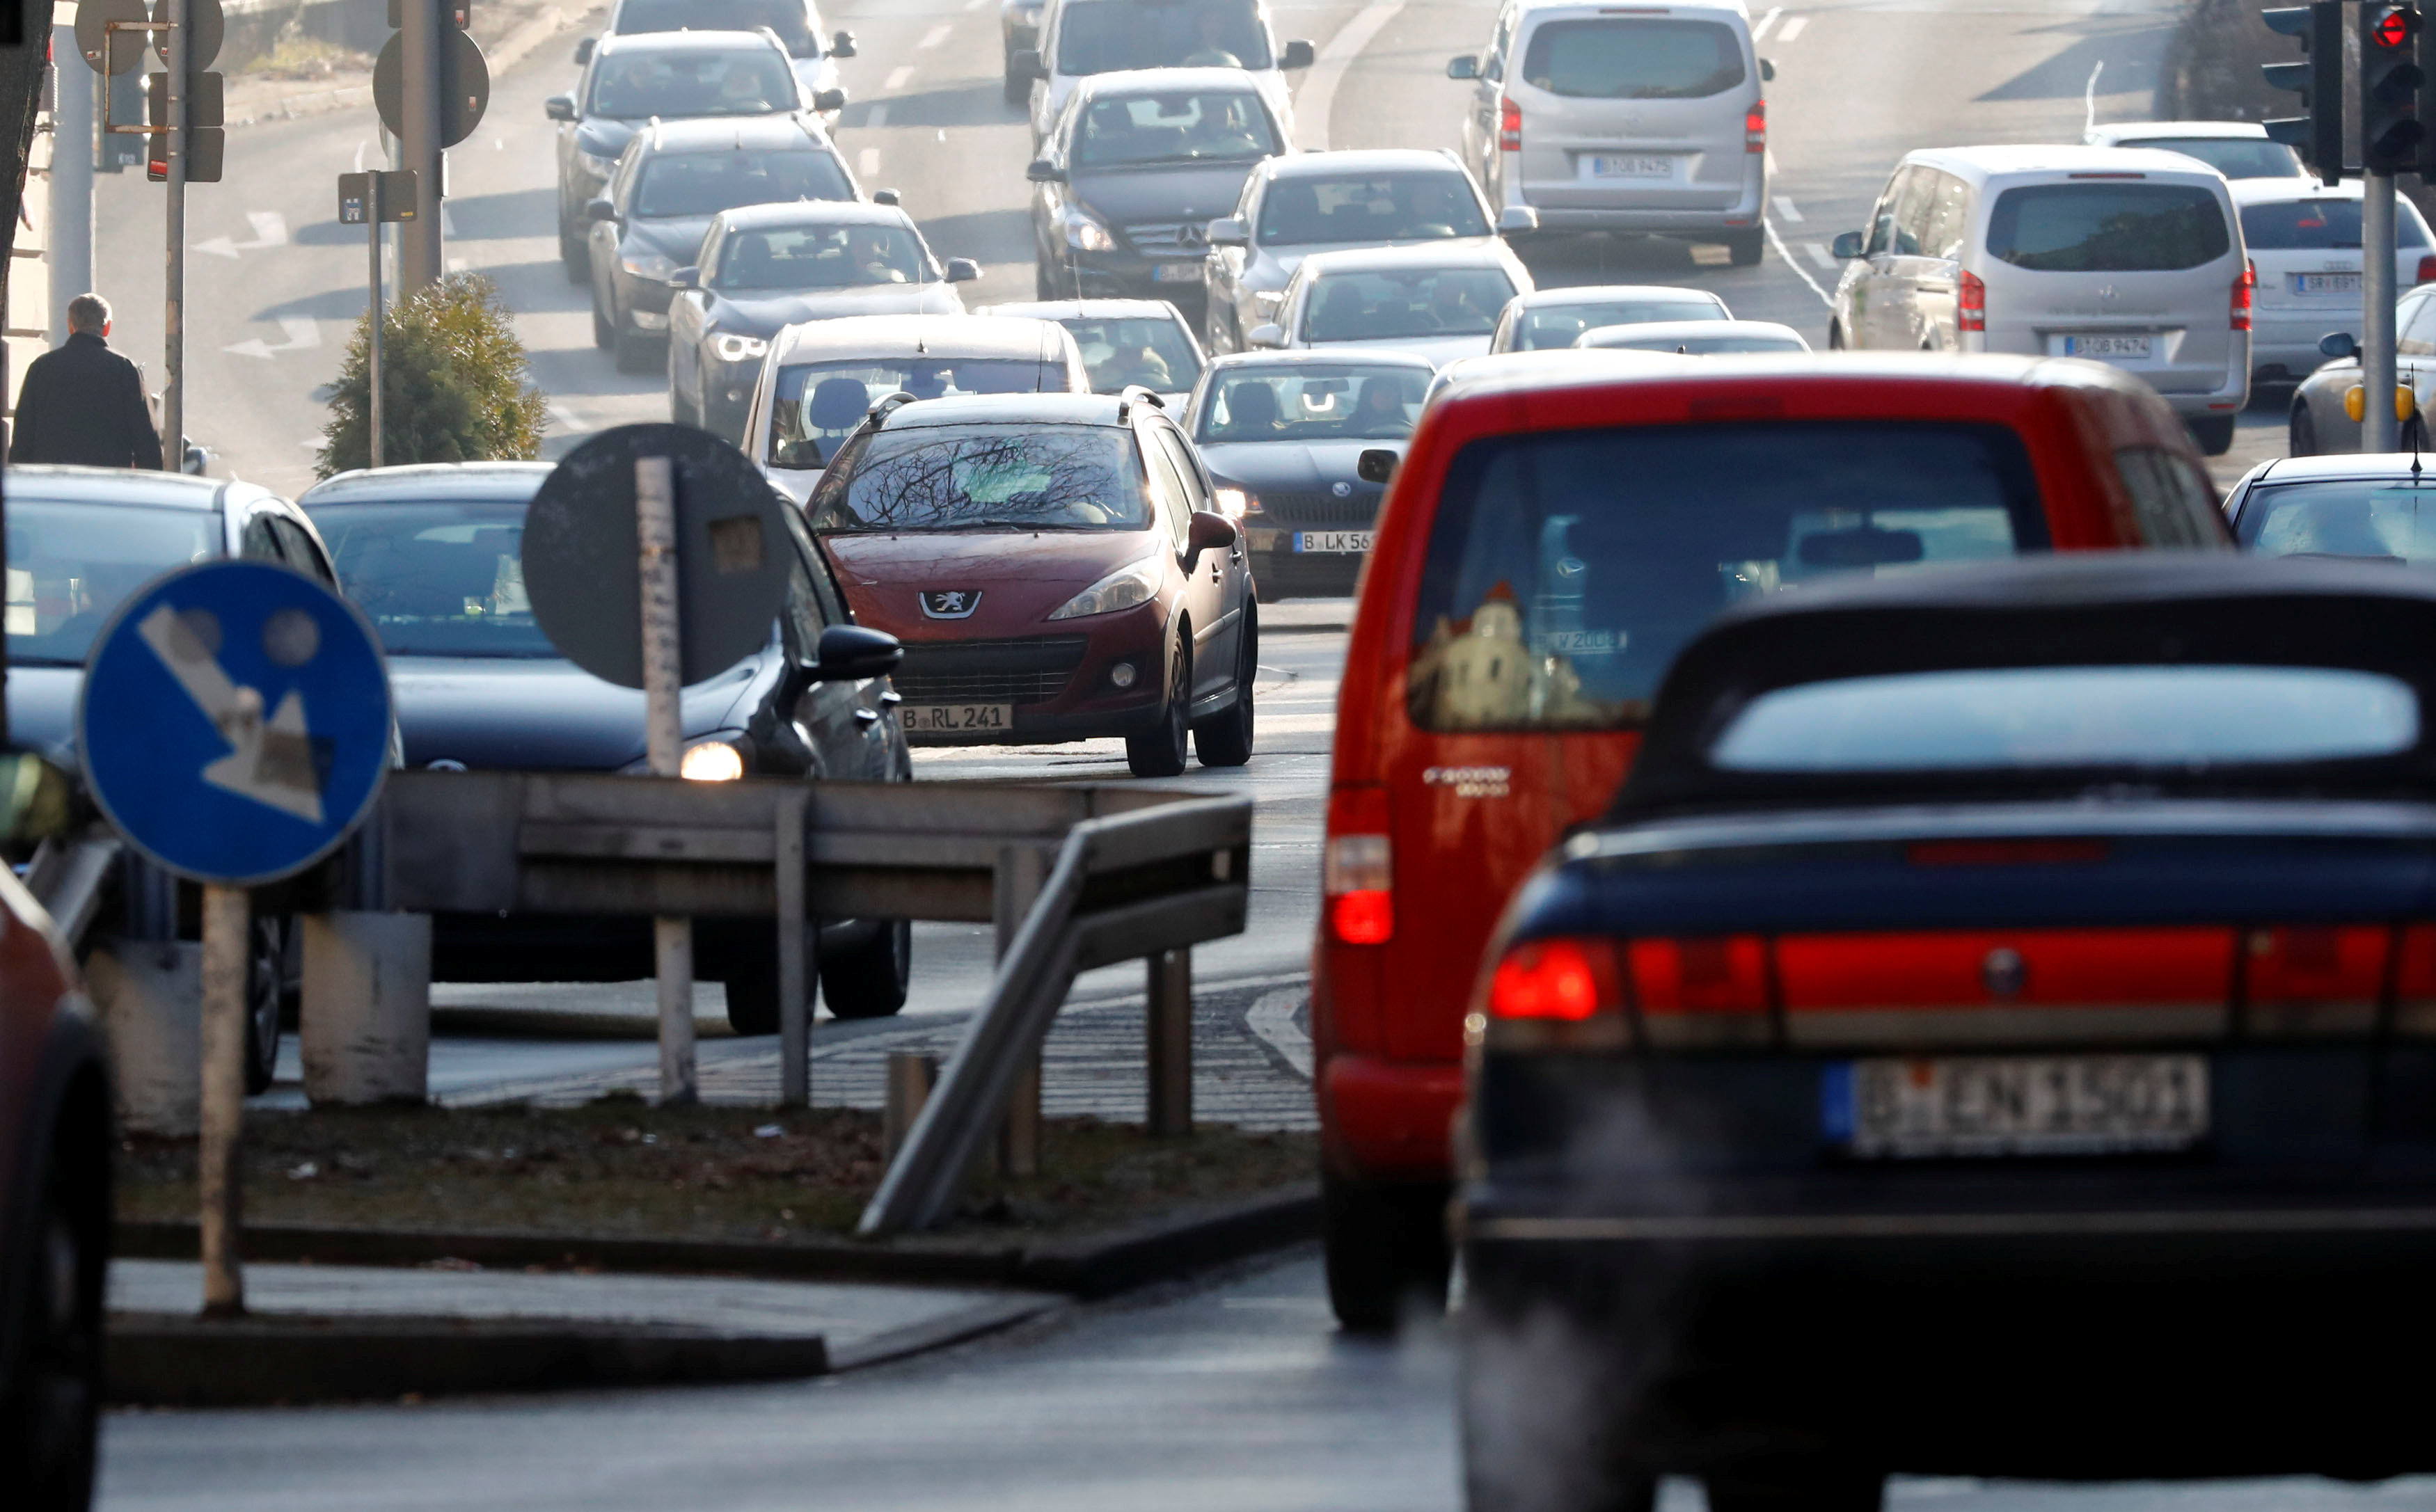 Cars are pictured during morning rush hour at Schildhorn Street in a Berlin